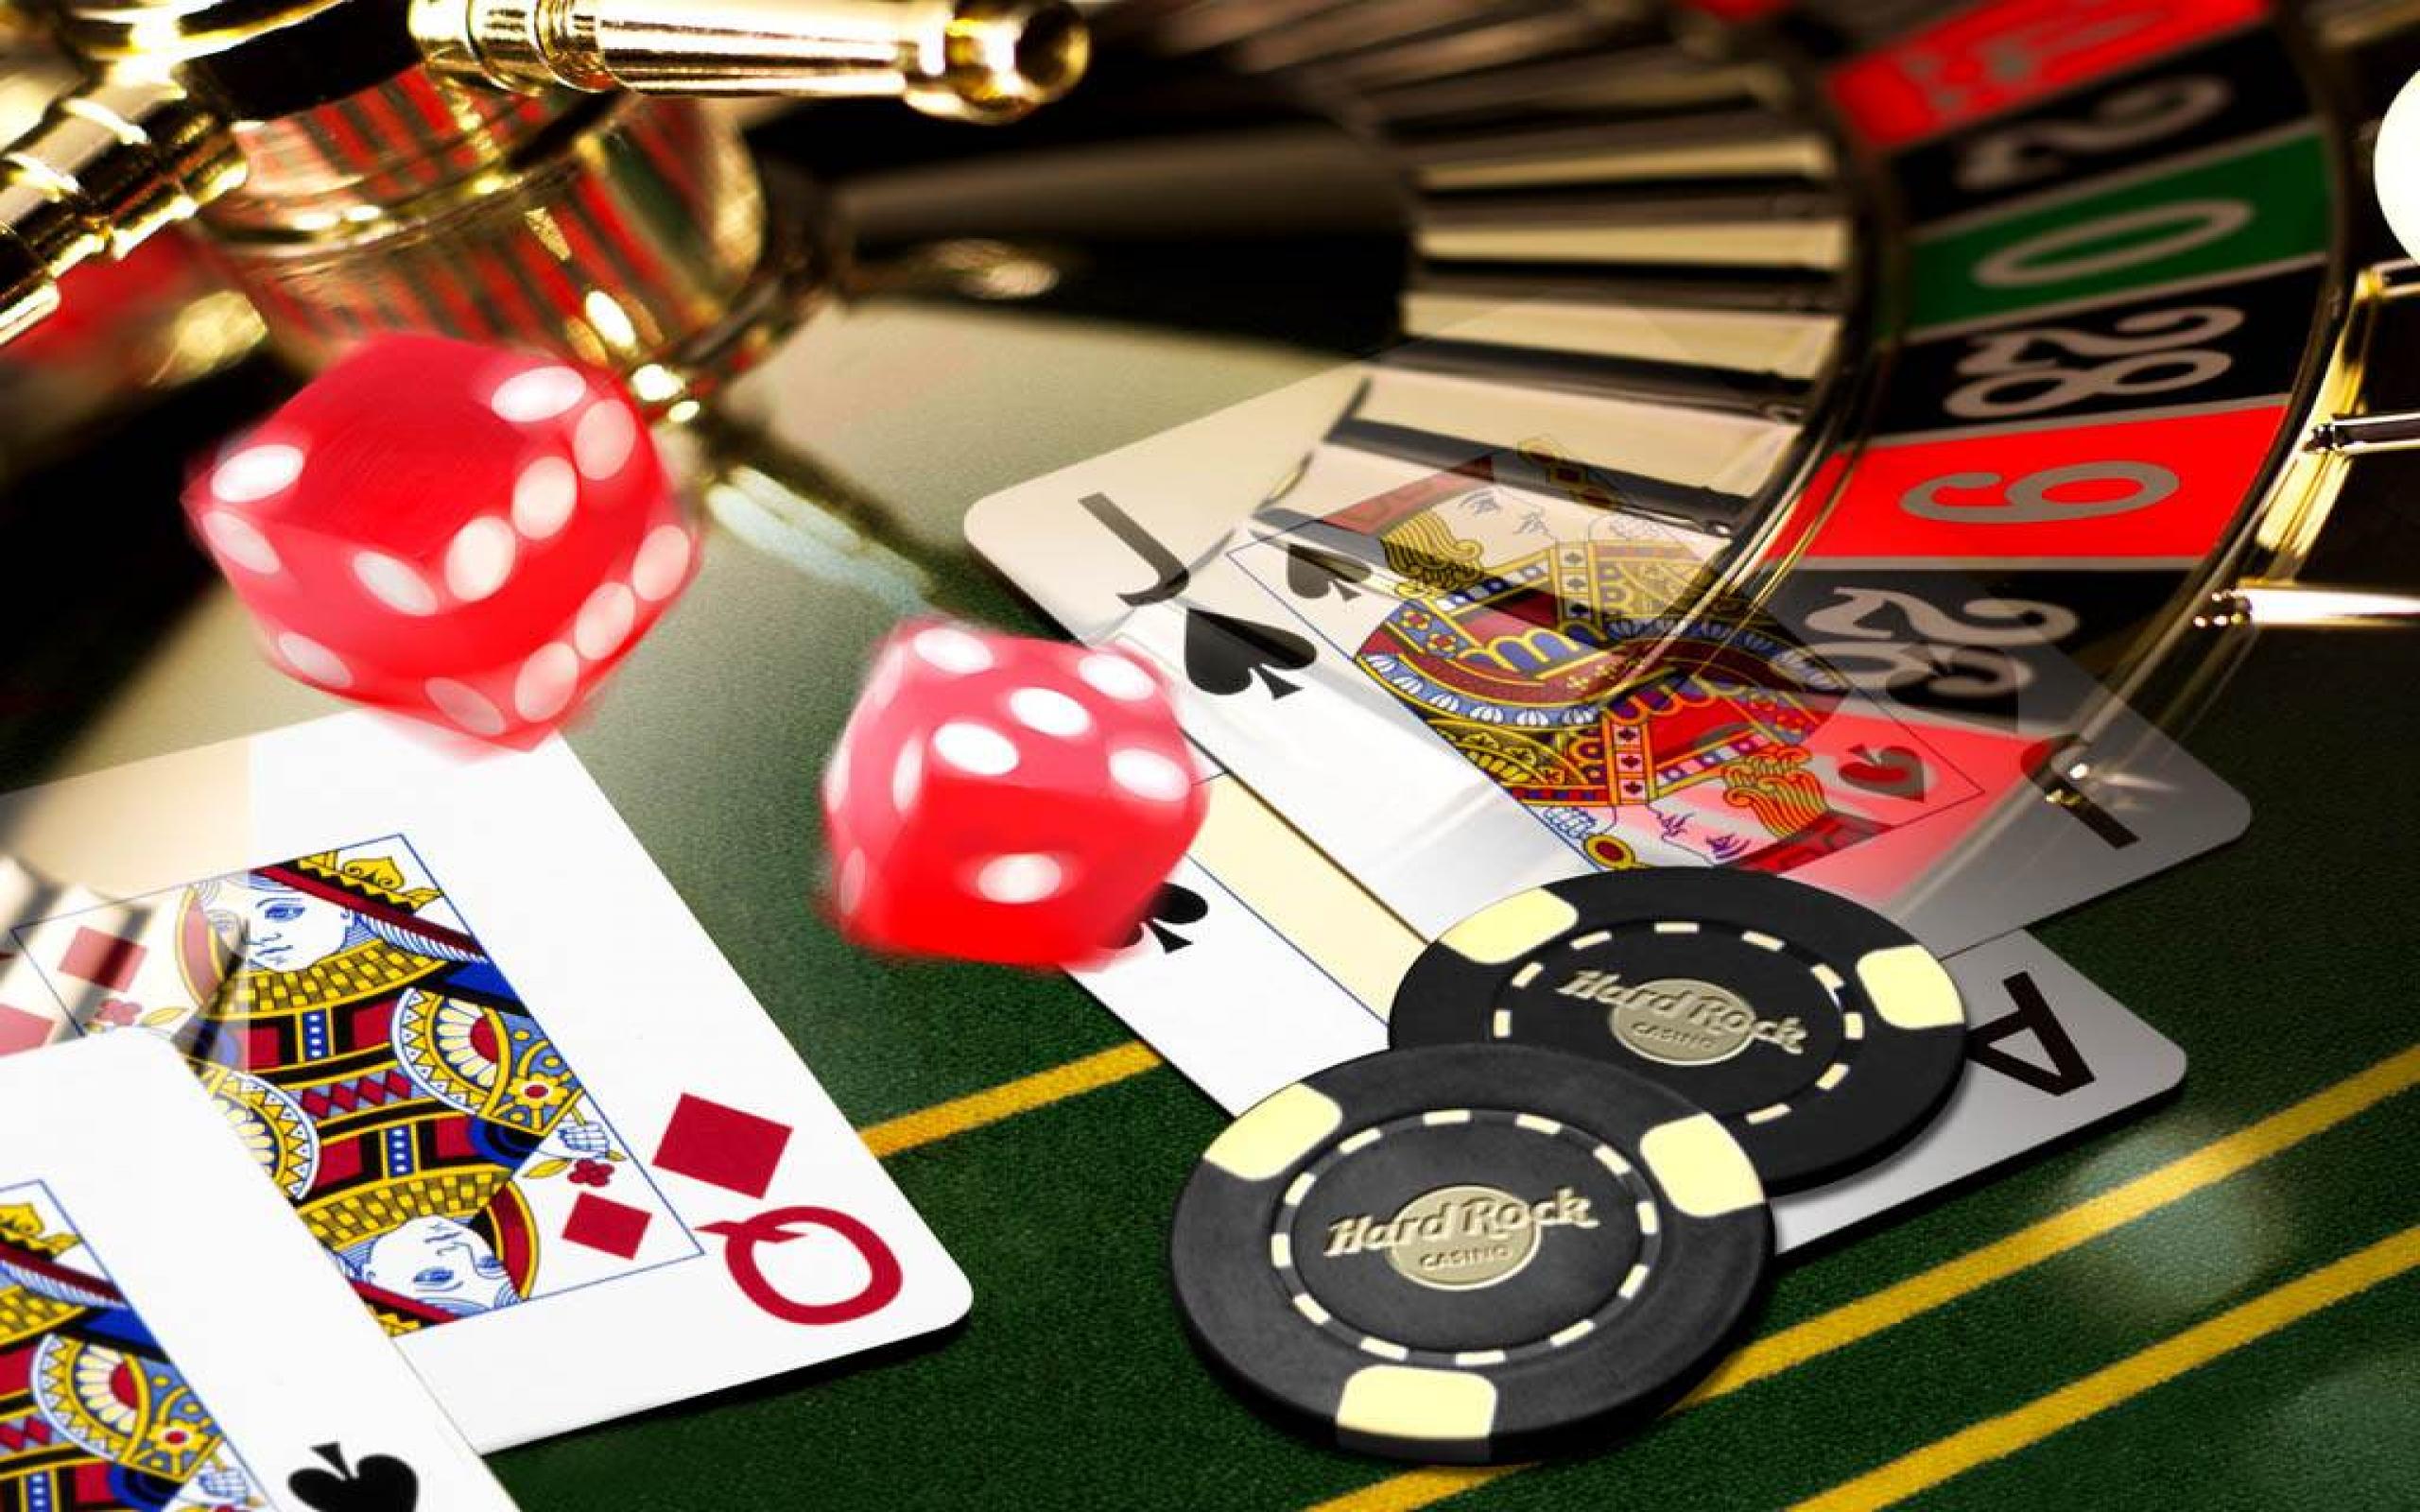 With Betflix, you will always feel excited and feel like you are in a real casino